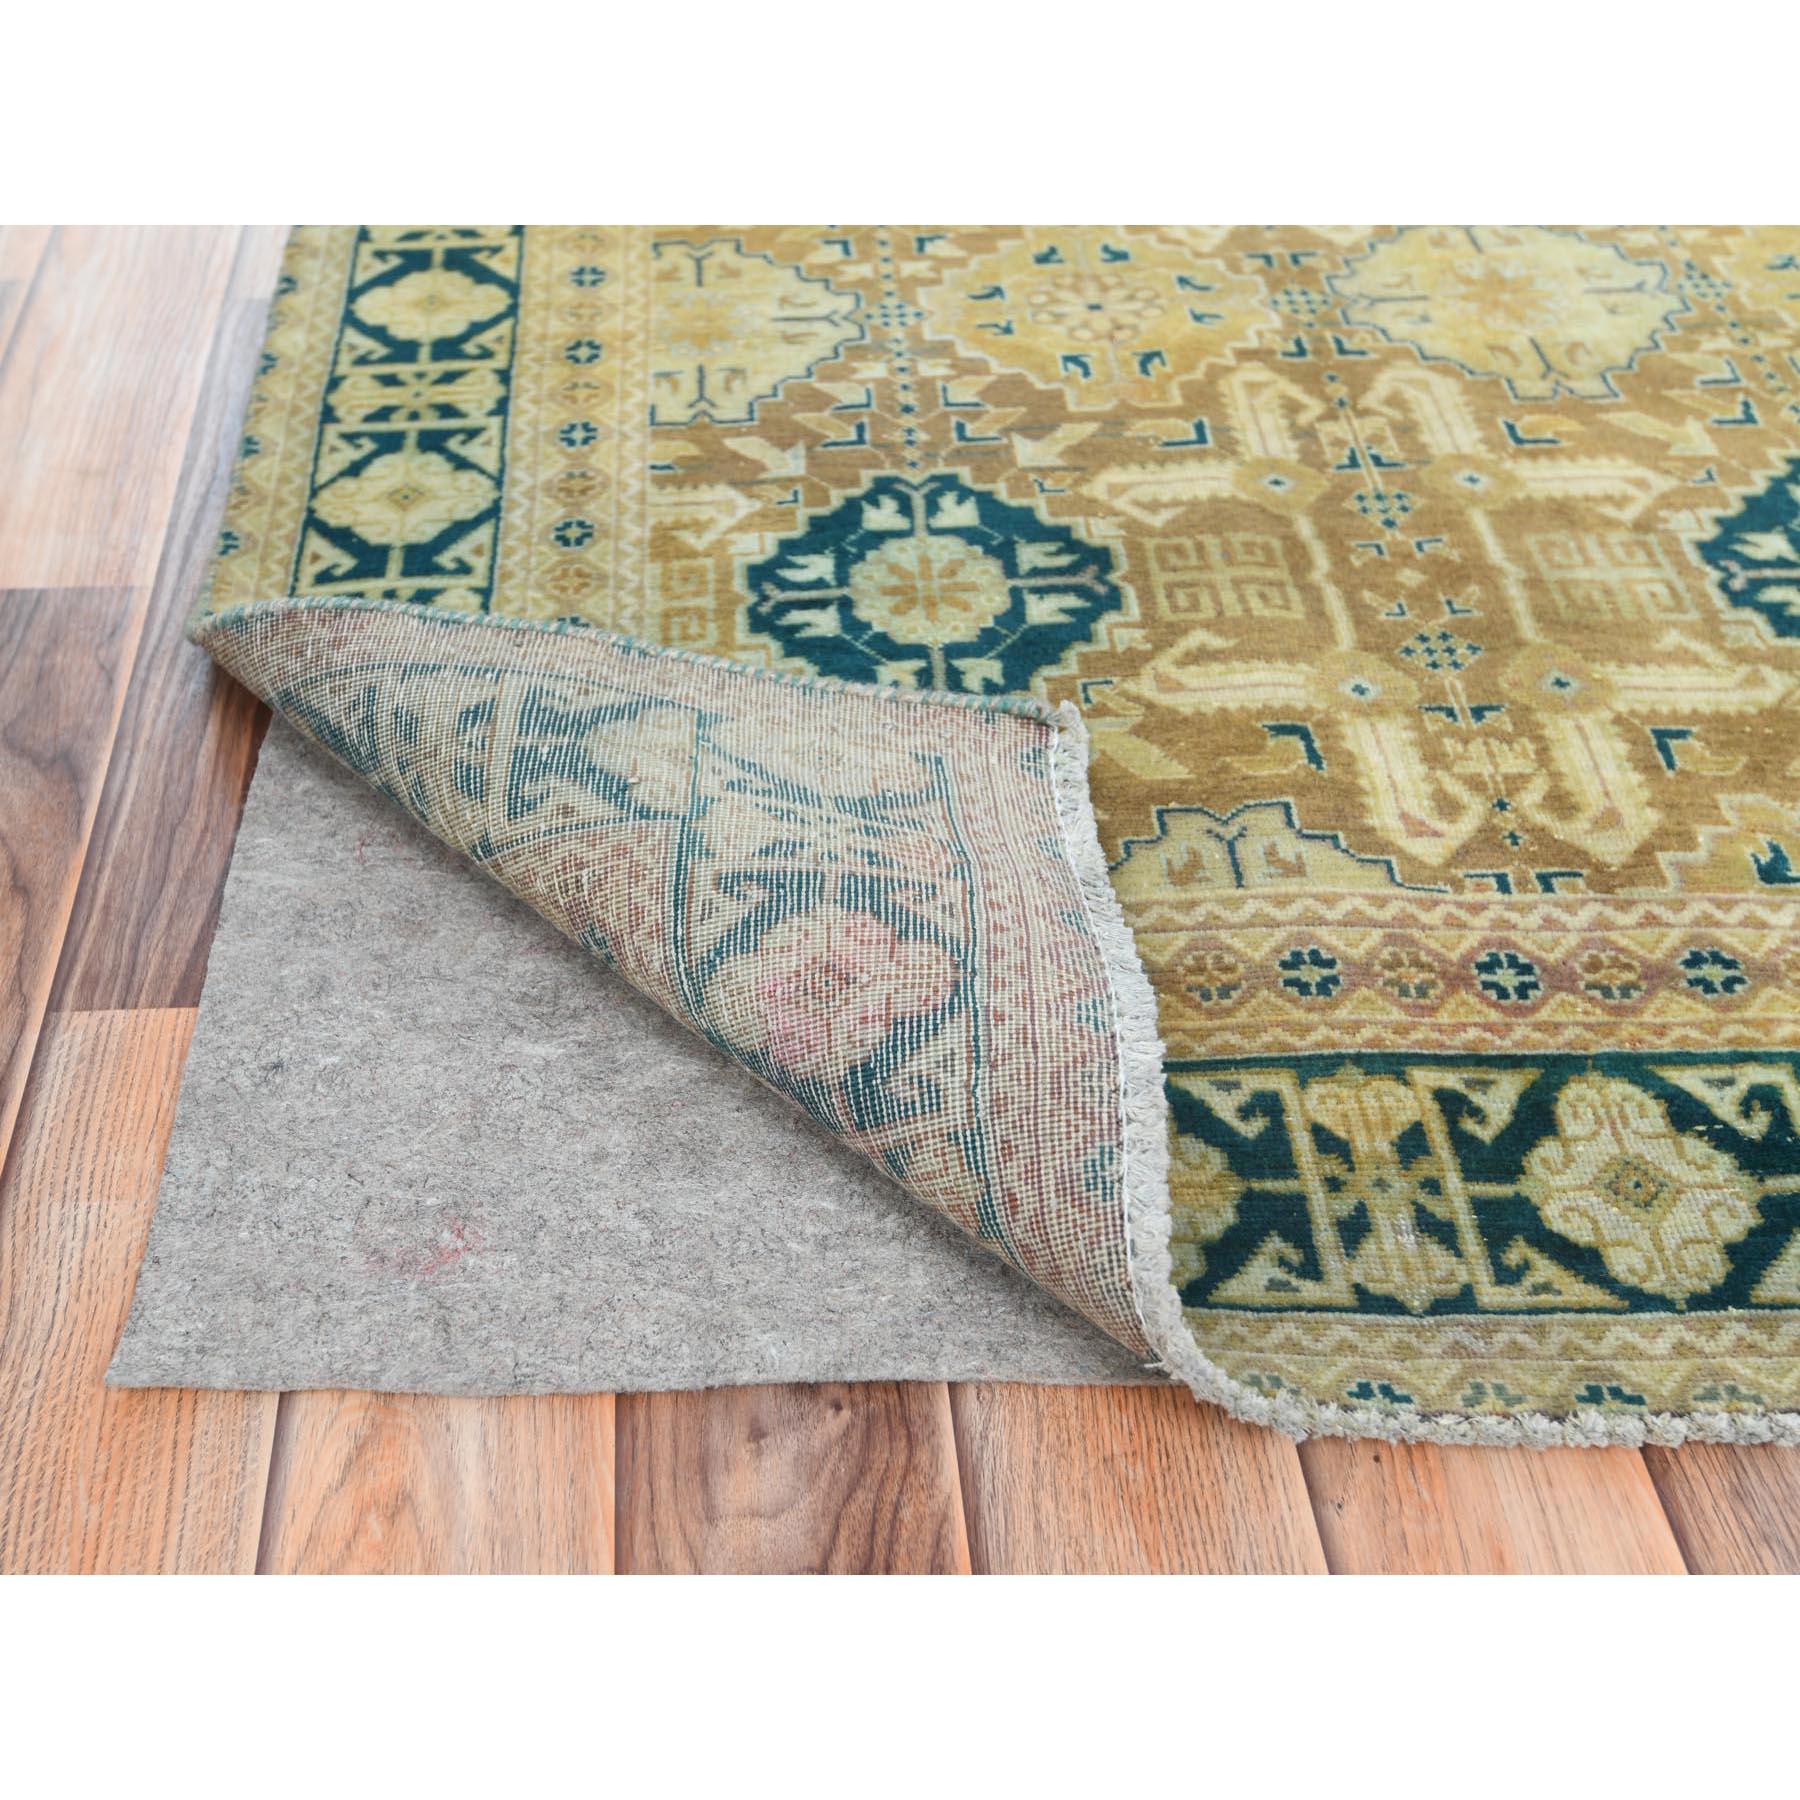 Medieval Gold Color, Vintage Persian Abadeh, Hand Knotted Worn Wool Distressed Look Rug